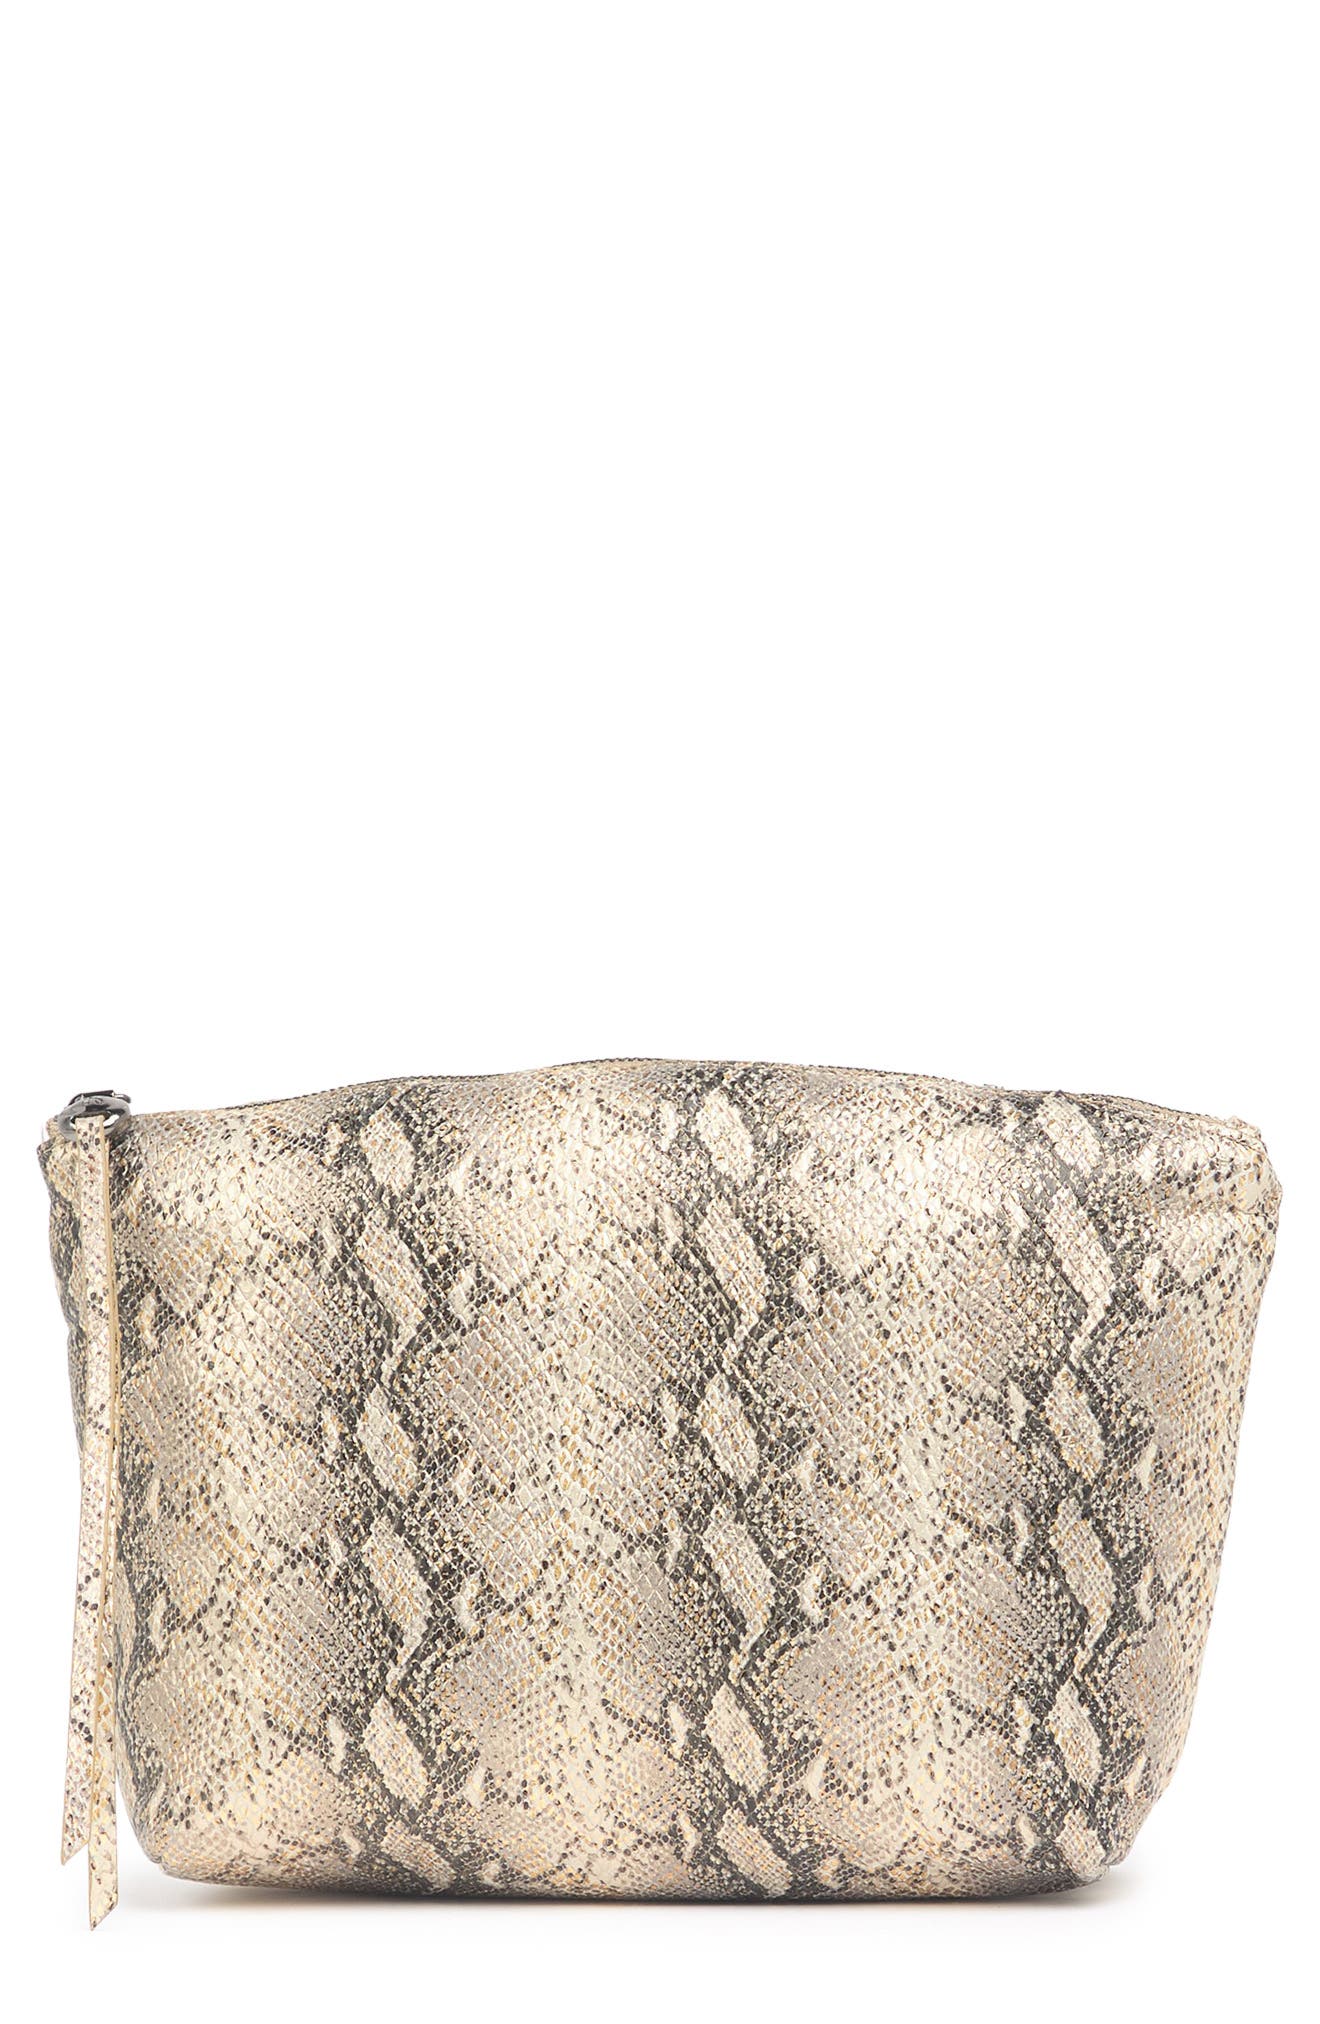 HOBO MN17001 PRUDENCE GLAMOUR SNAKE CLUTCH LEATHER MSRP $178 